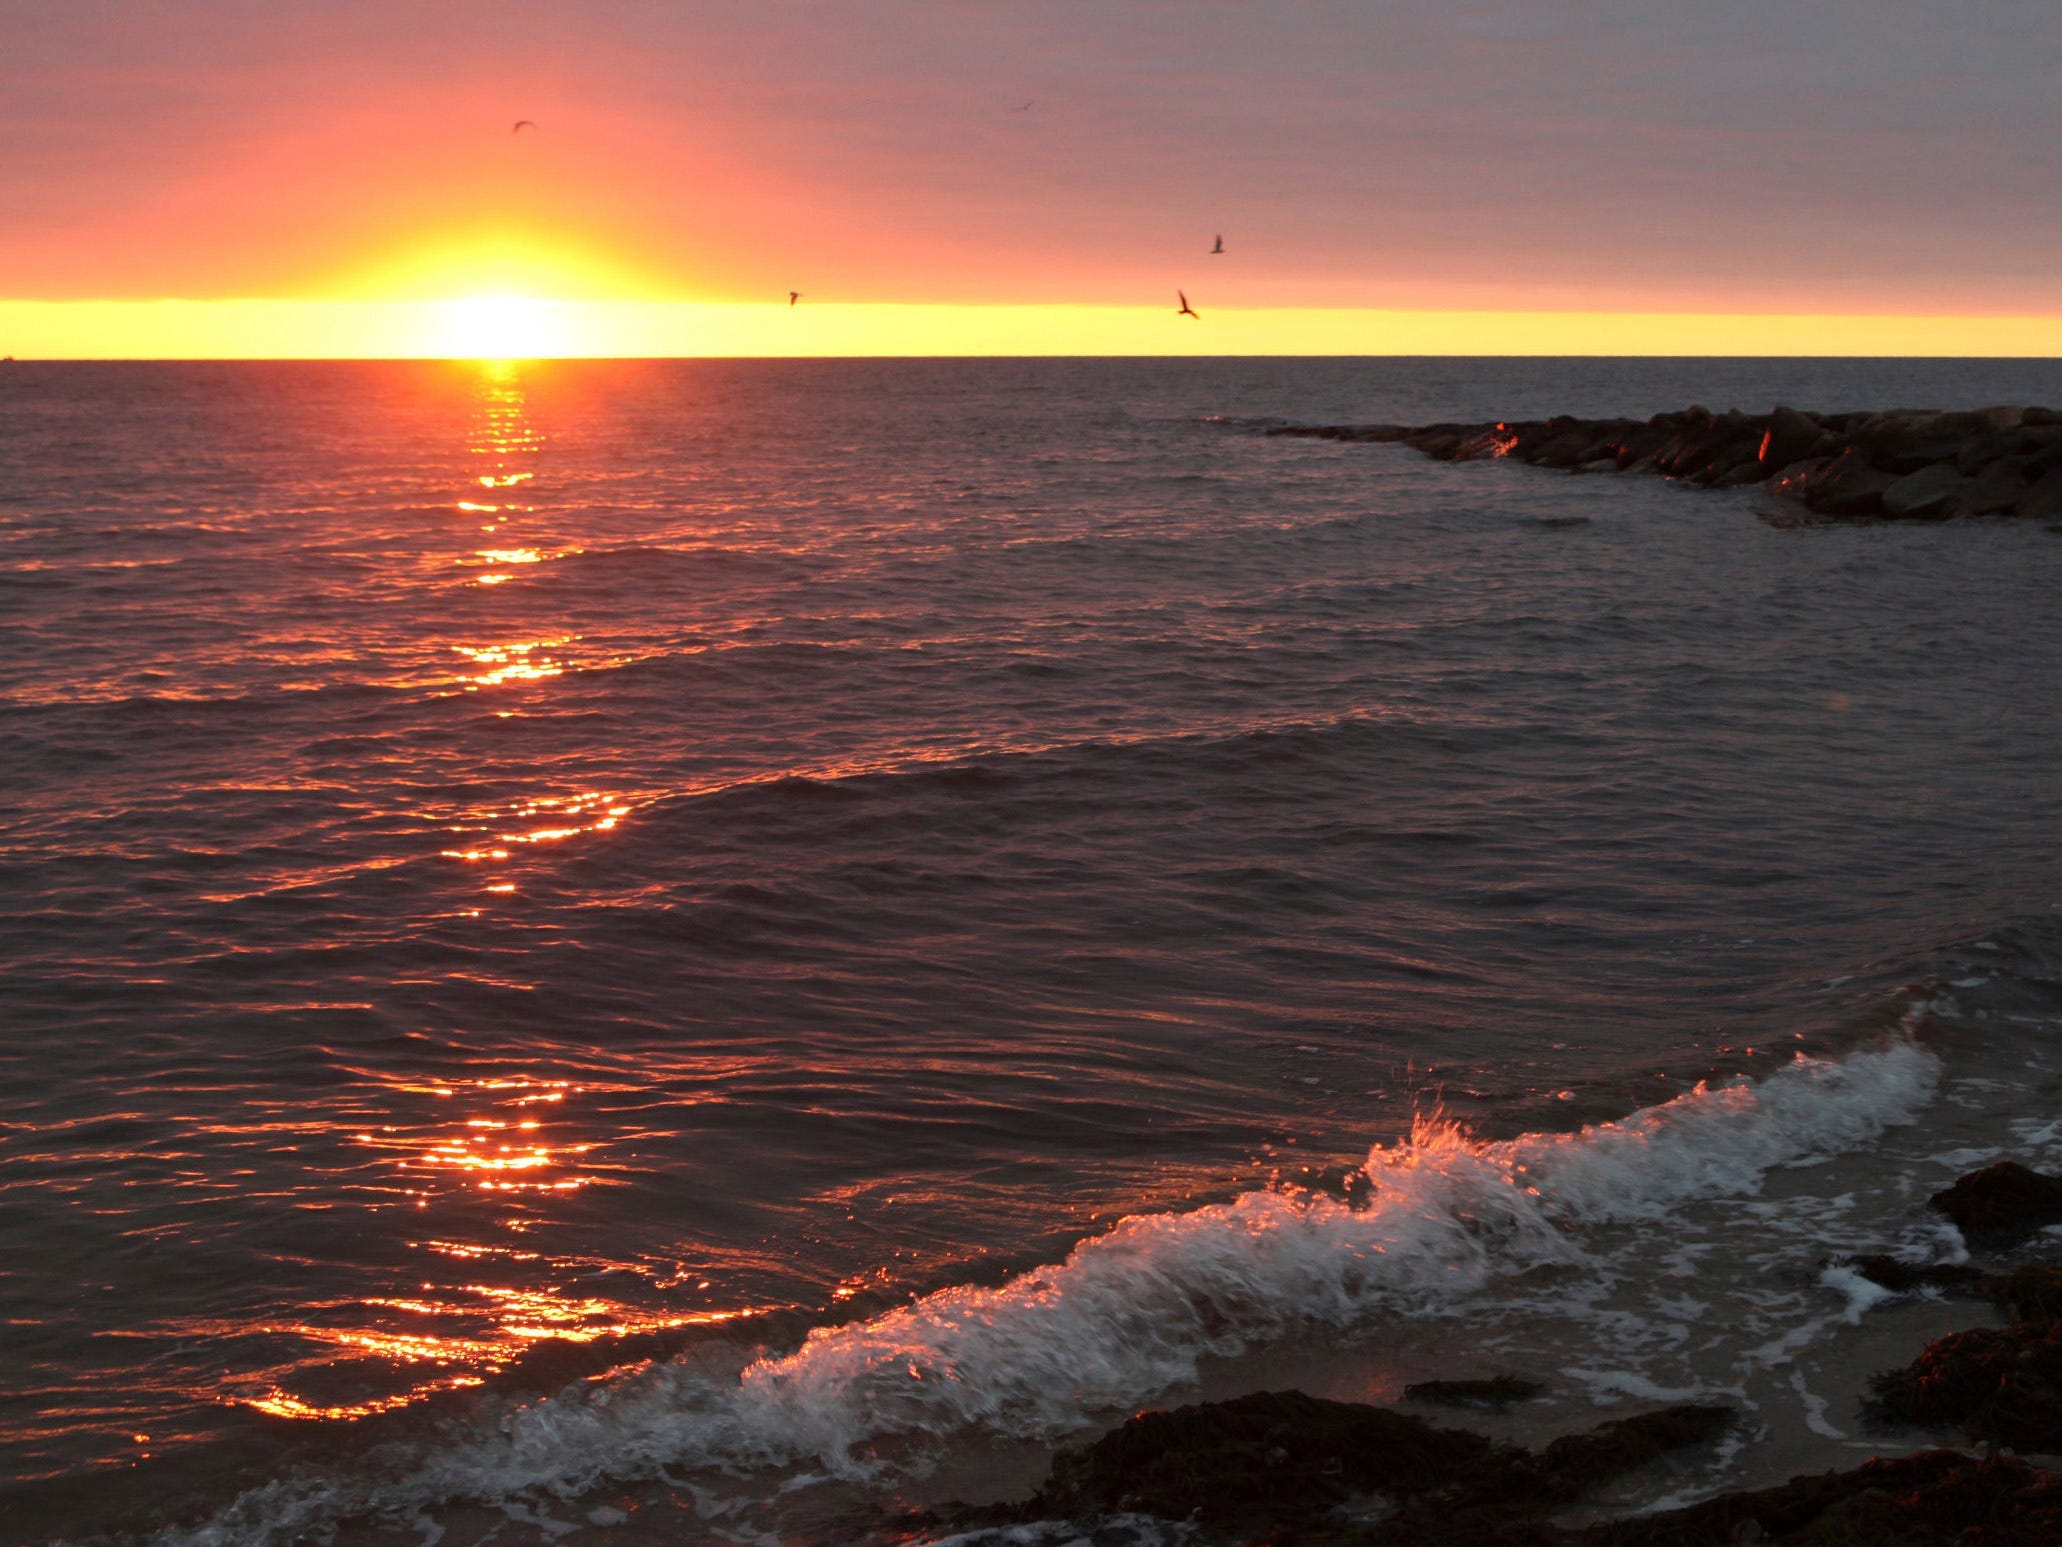 The sun rises over Nantucket Sound as seen from Popponesset Beach.